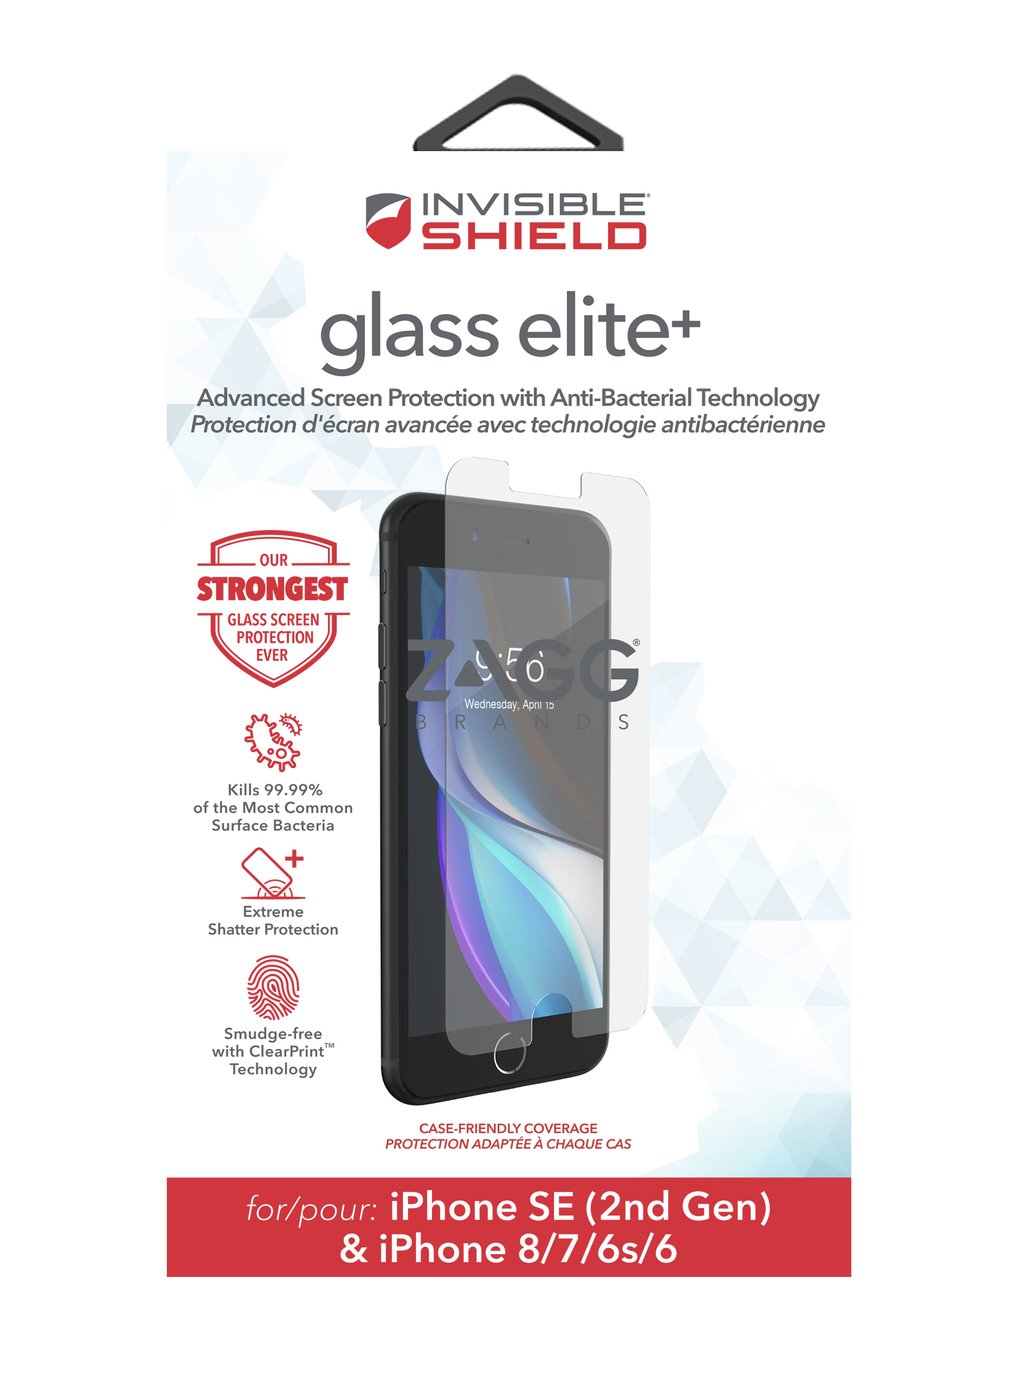 InvisibleShield Glass Elite+ iPhone 6/7/8/SE Protector Review